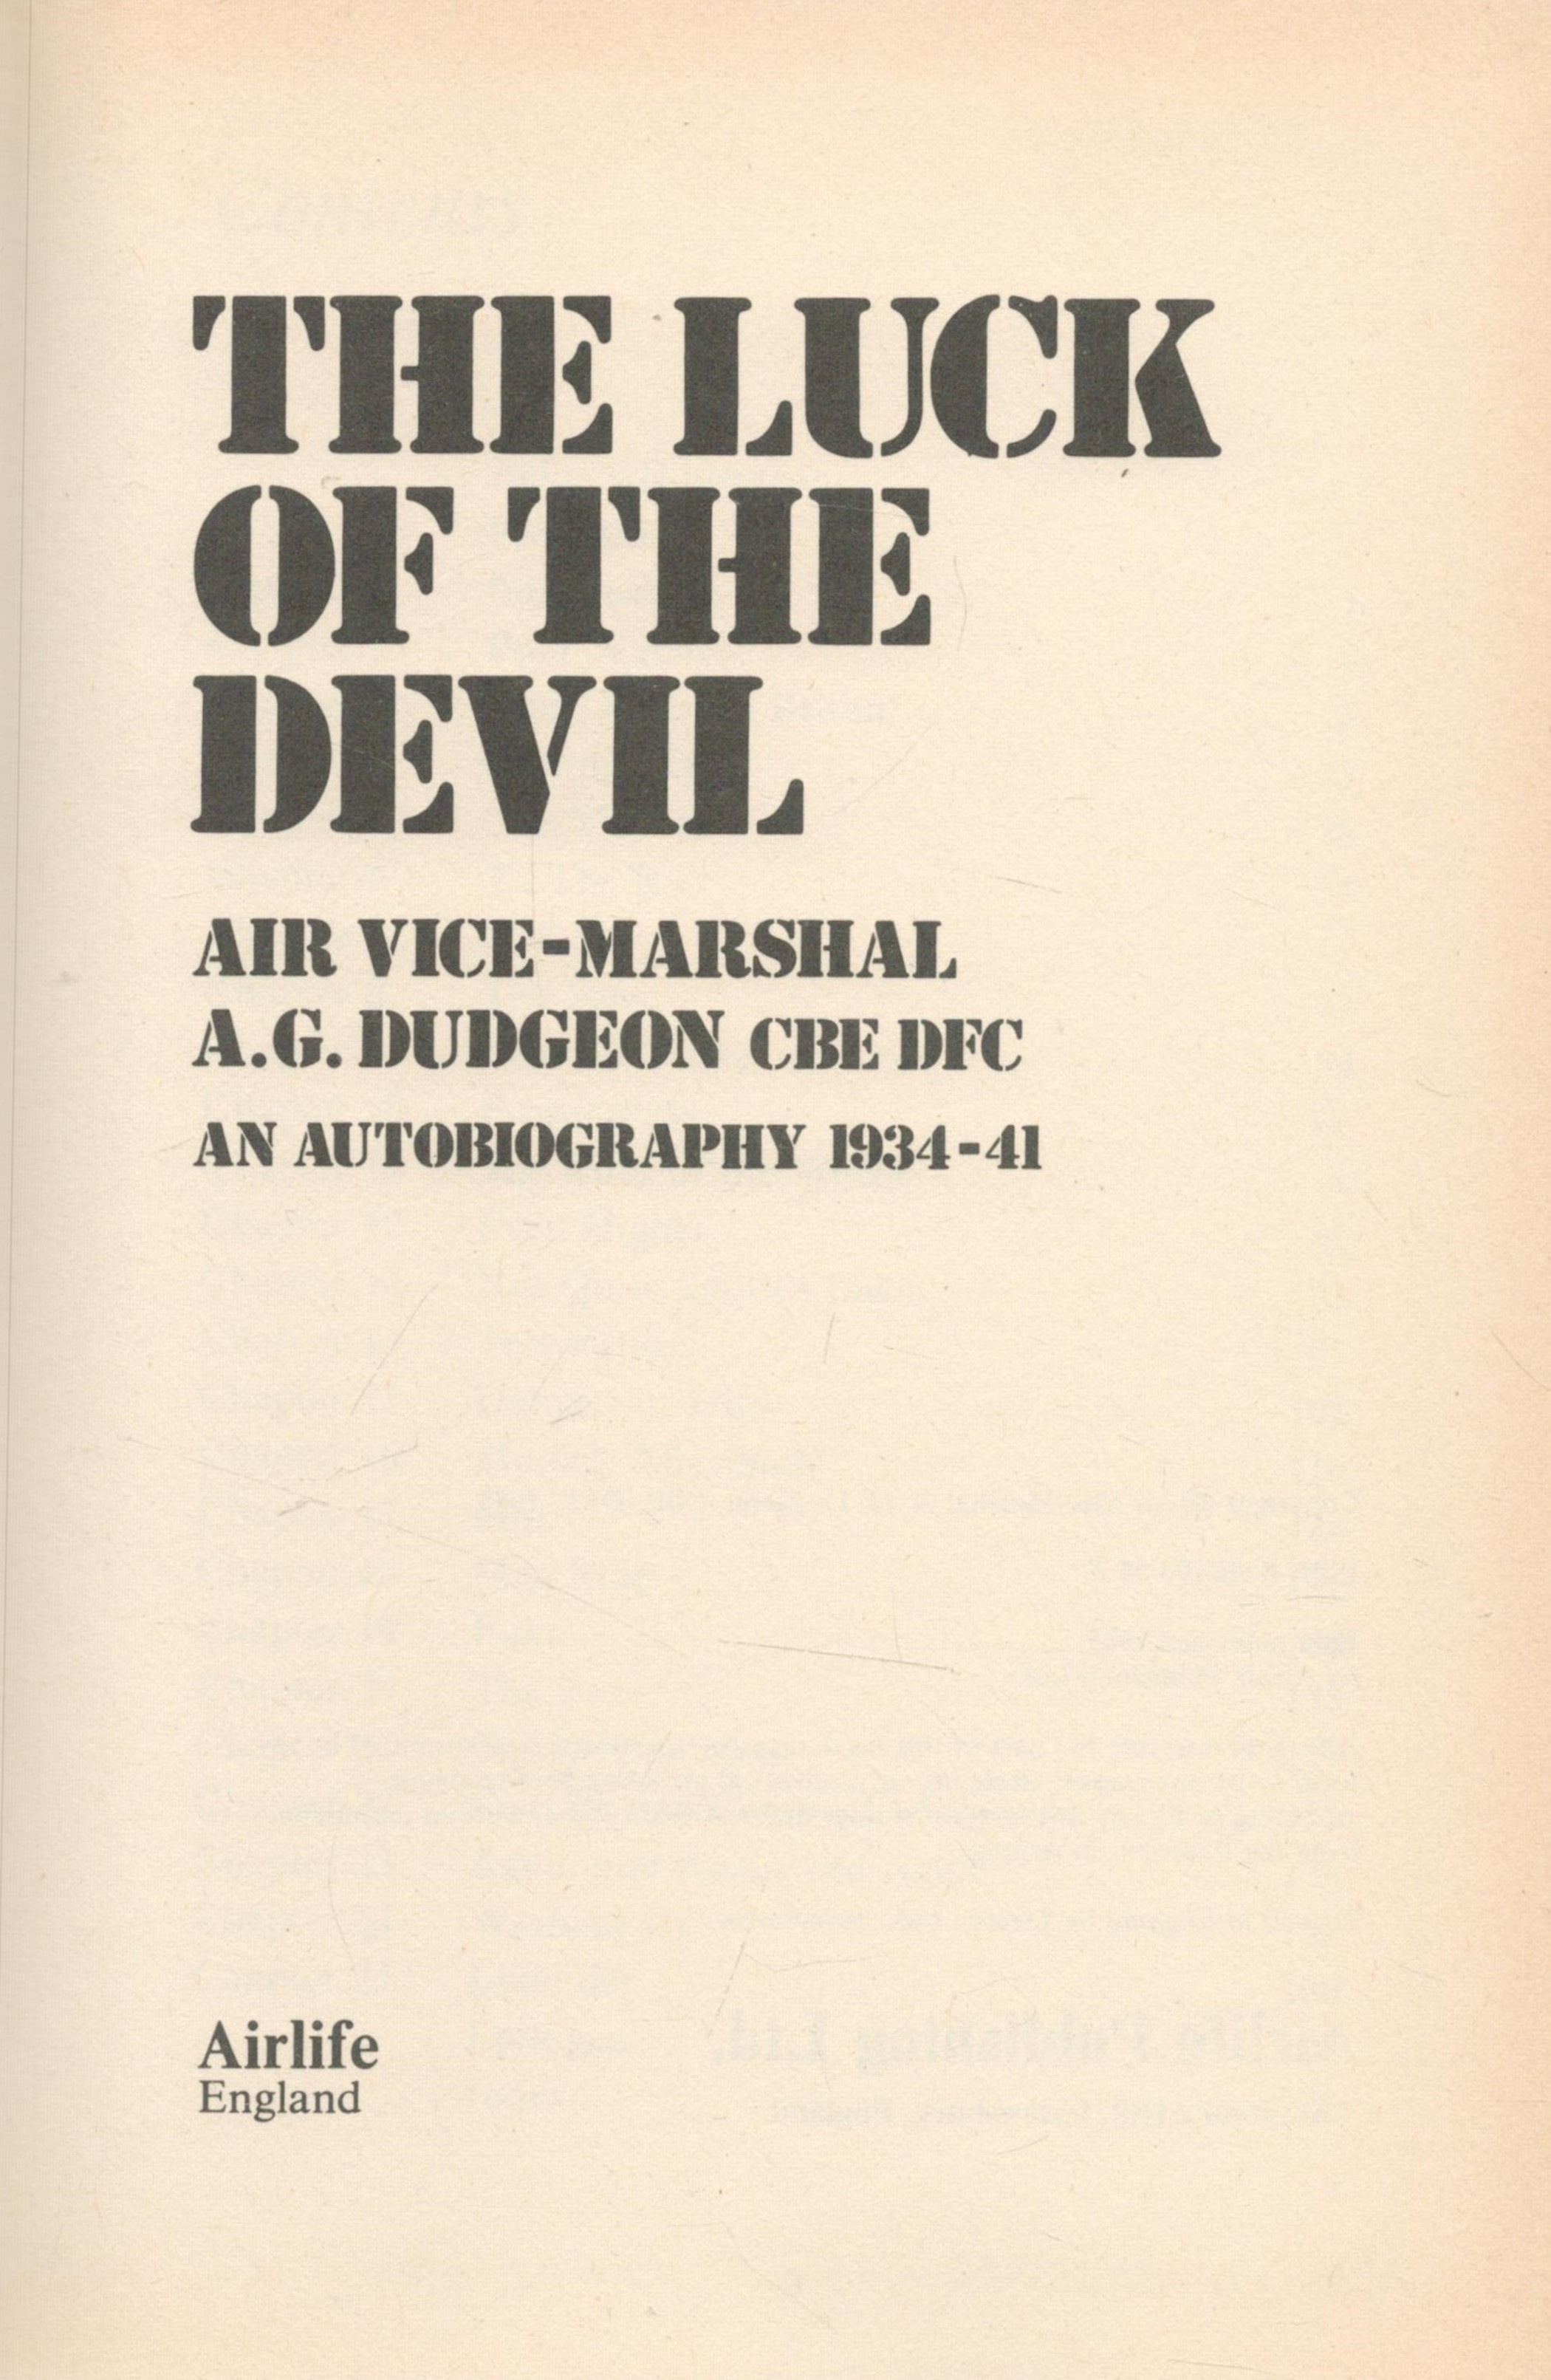 The Luck of The Devil An Autobiography 1934 41 by Air Vice Marshal A G Dudgeon 1985 First Edition - Image 2 of 3